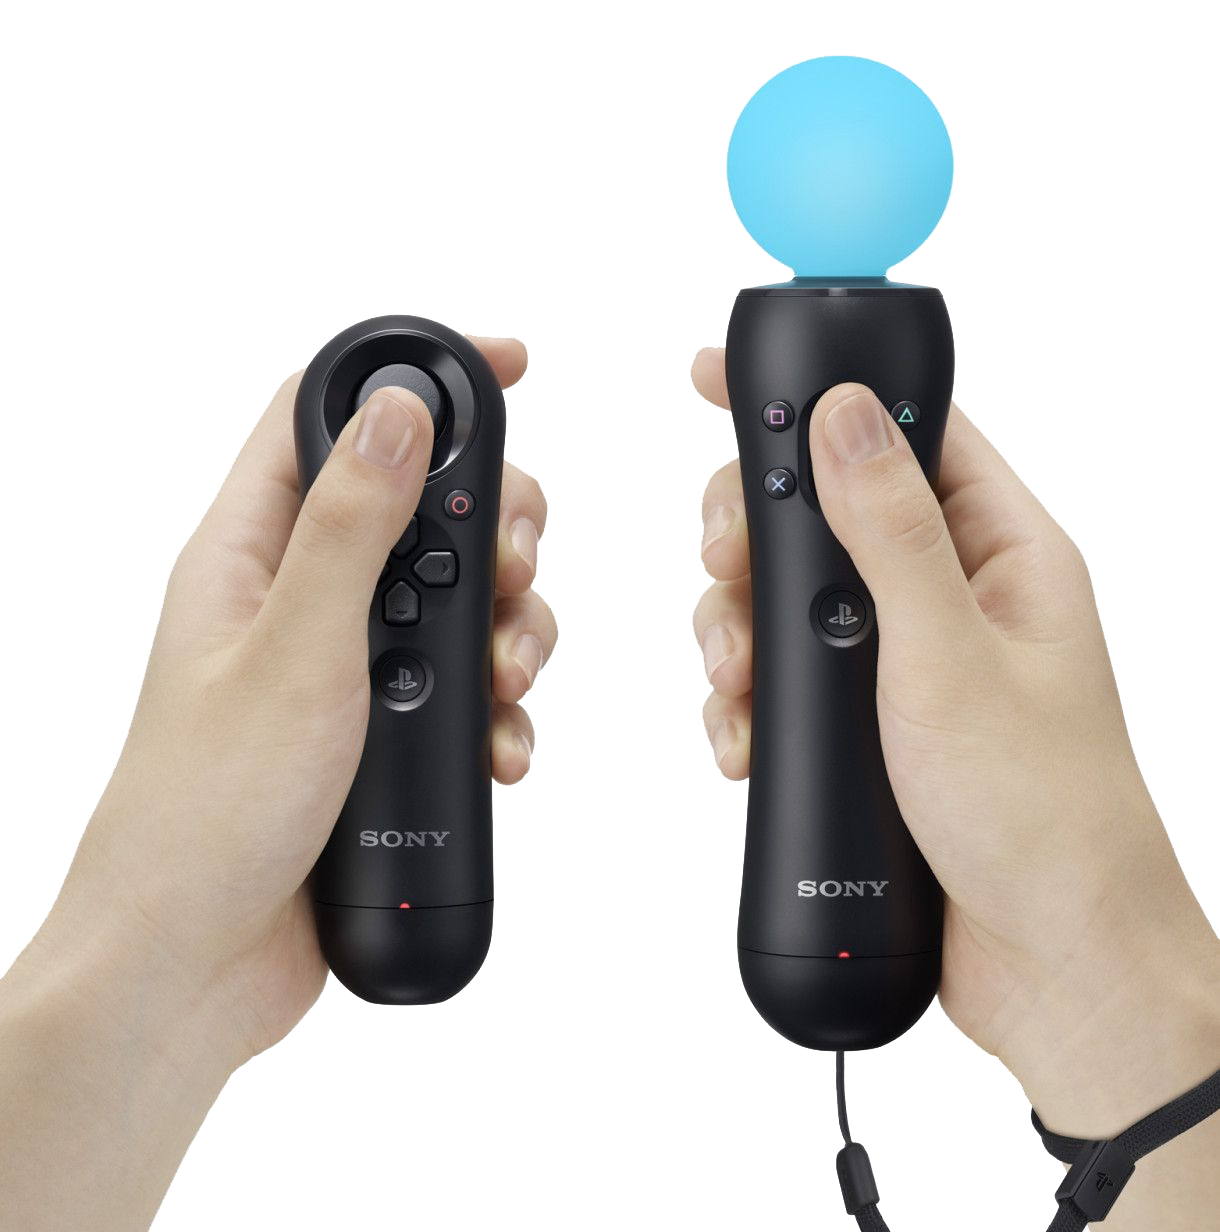 Sony ps4 move Motion Controller. Sony Motion Controller ps4. Контроллер Sony PLAYSTATION 3 move. Контроллеры PS move от Sony PS.